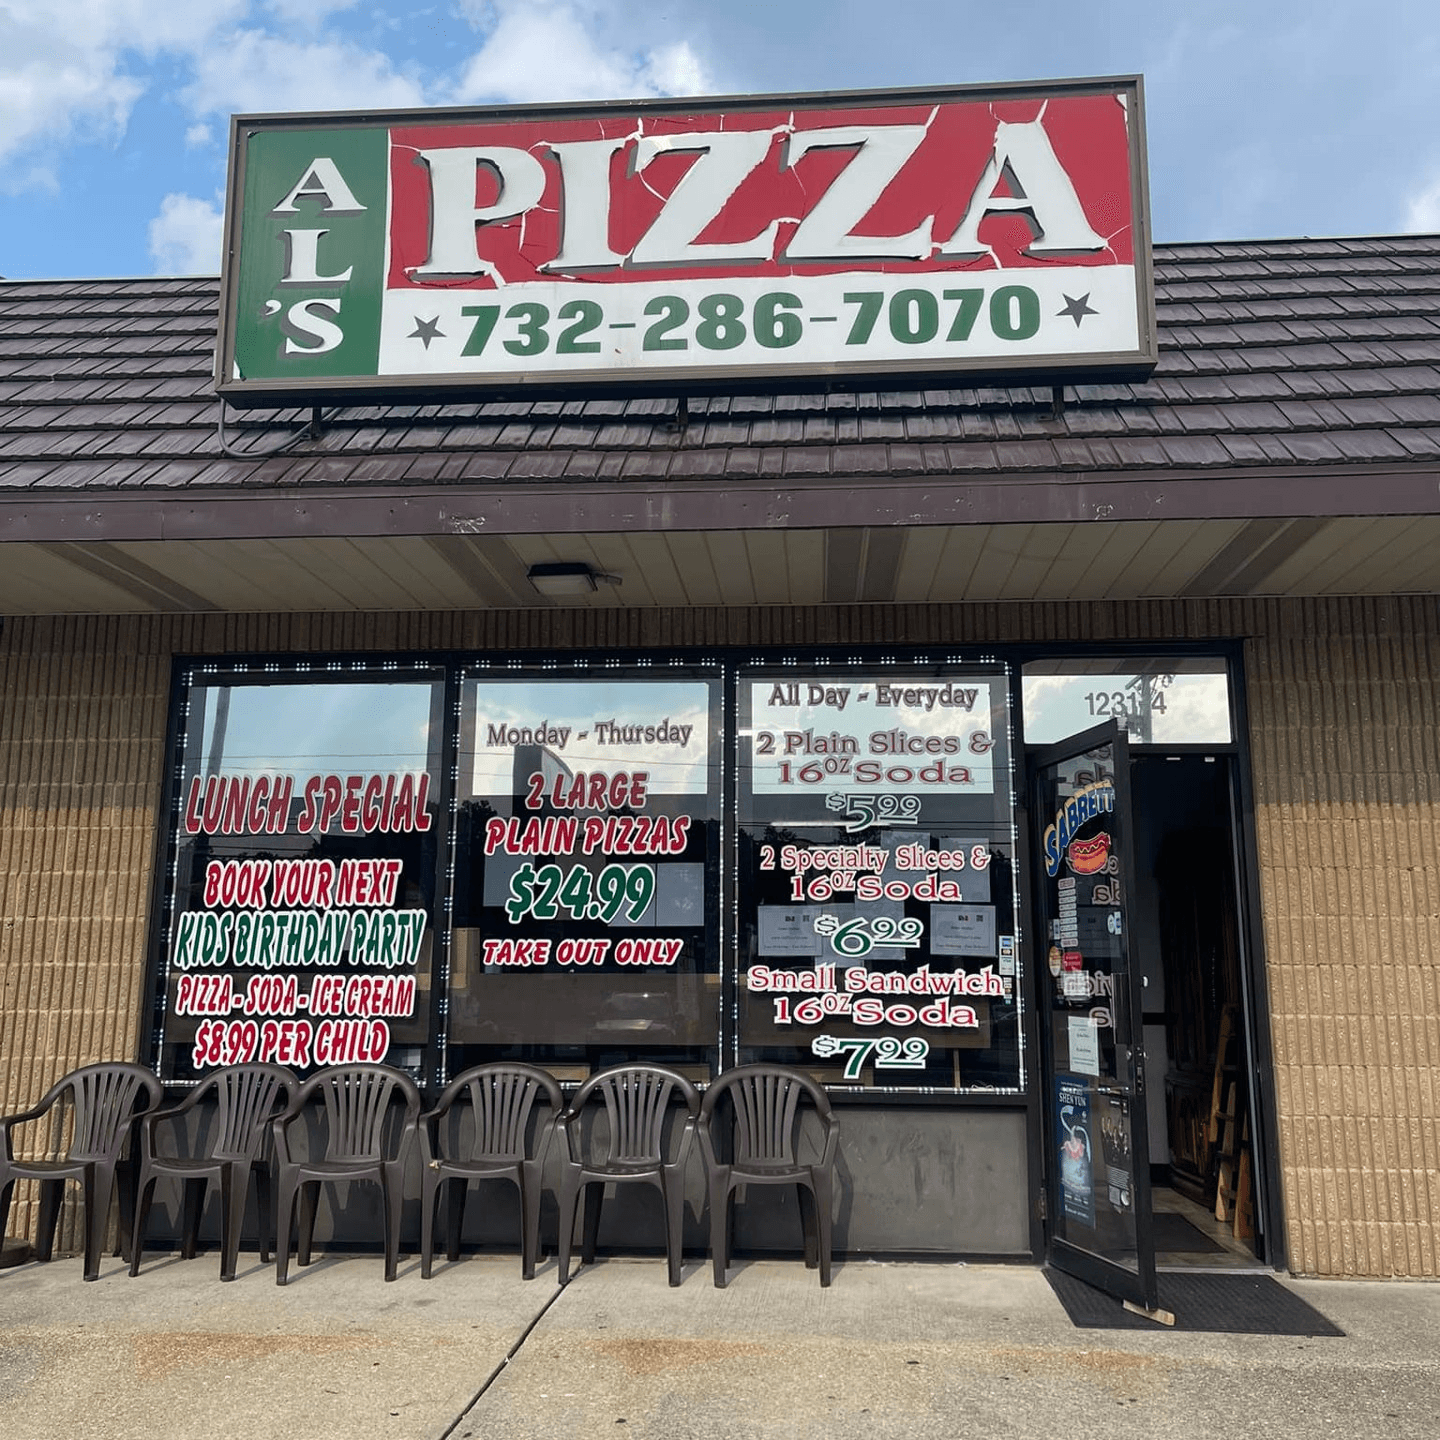 Al's Famous Pizza: A Slice of History 🍕